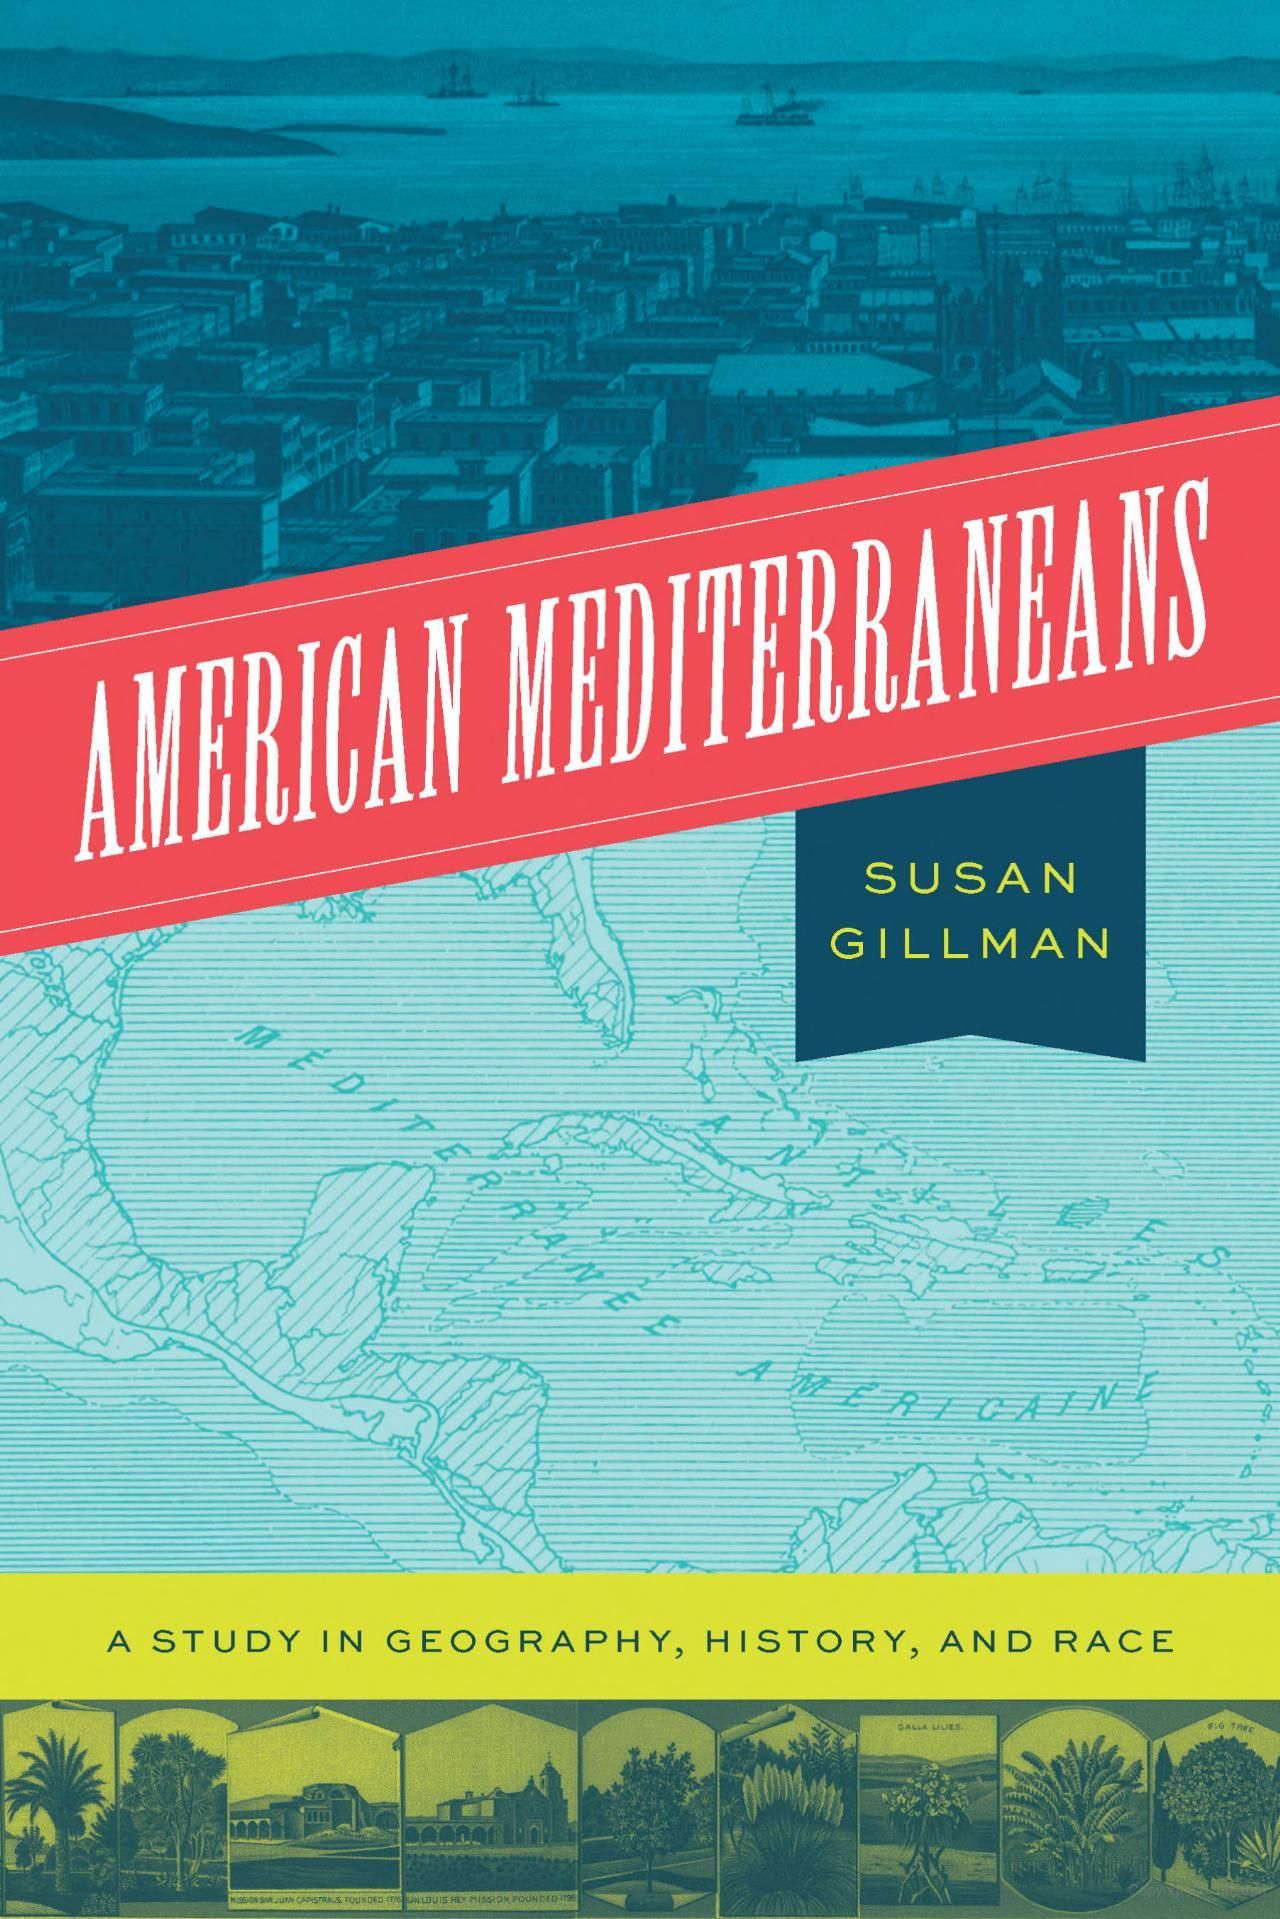 Racialized Geographies: A Conversation with Susan Gillman